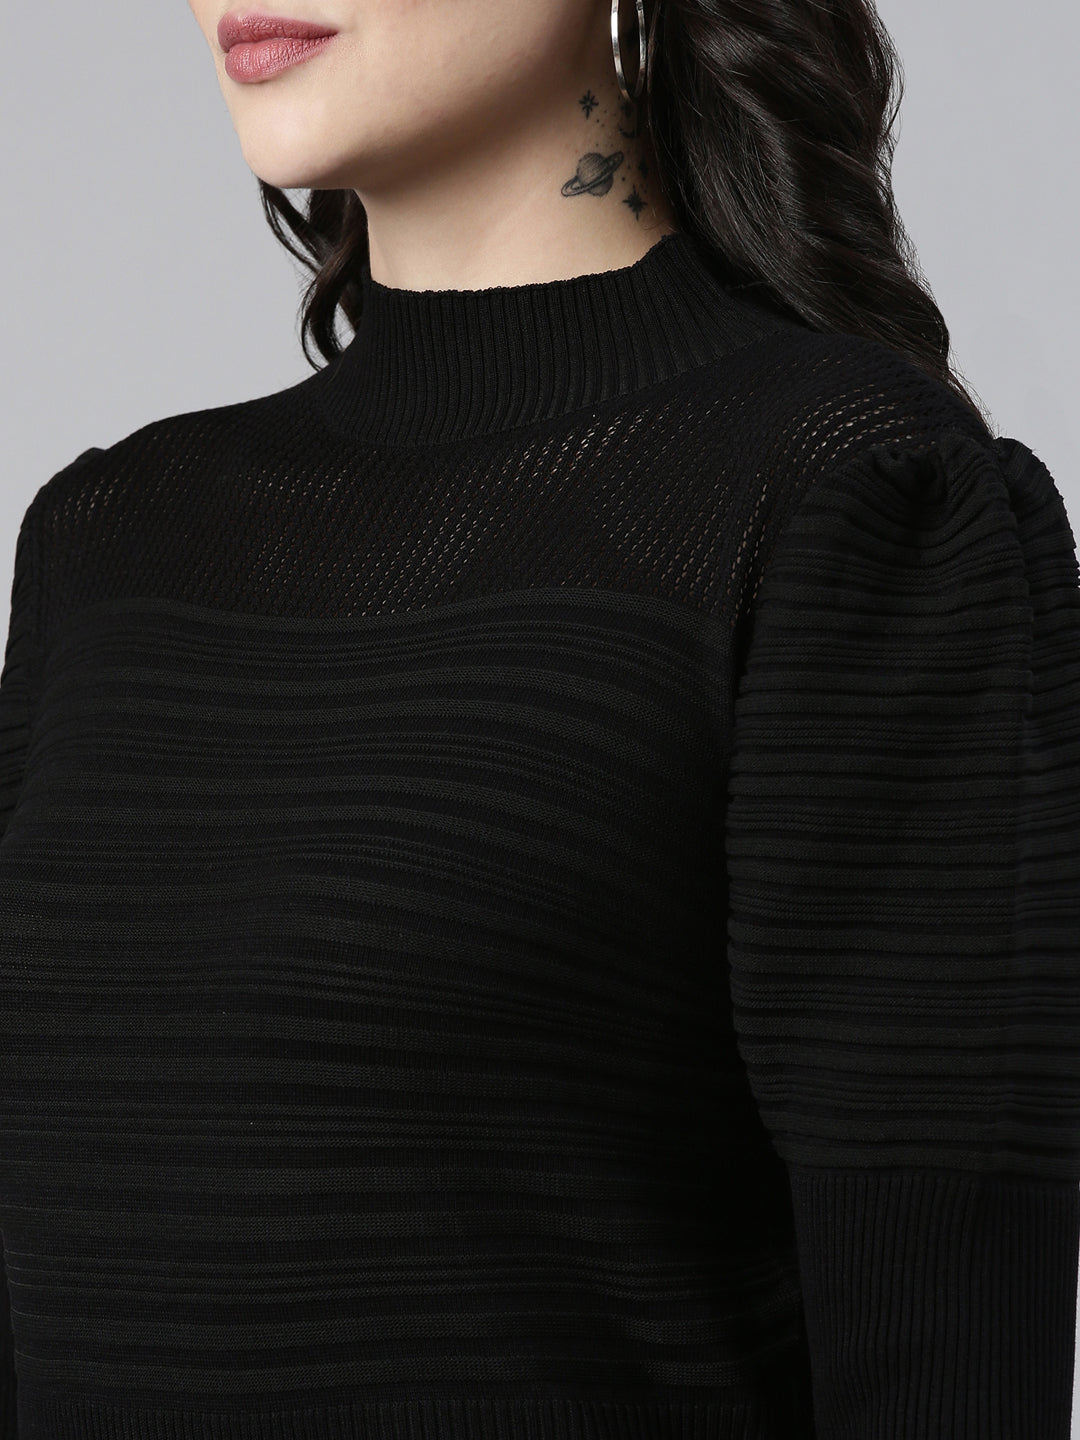 High Neck Self Design Puff Sleeves Fitted Black Top